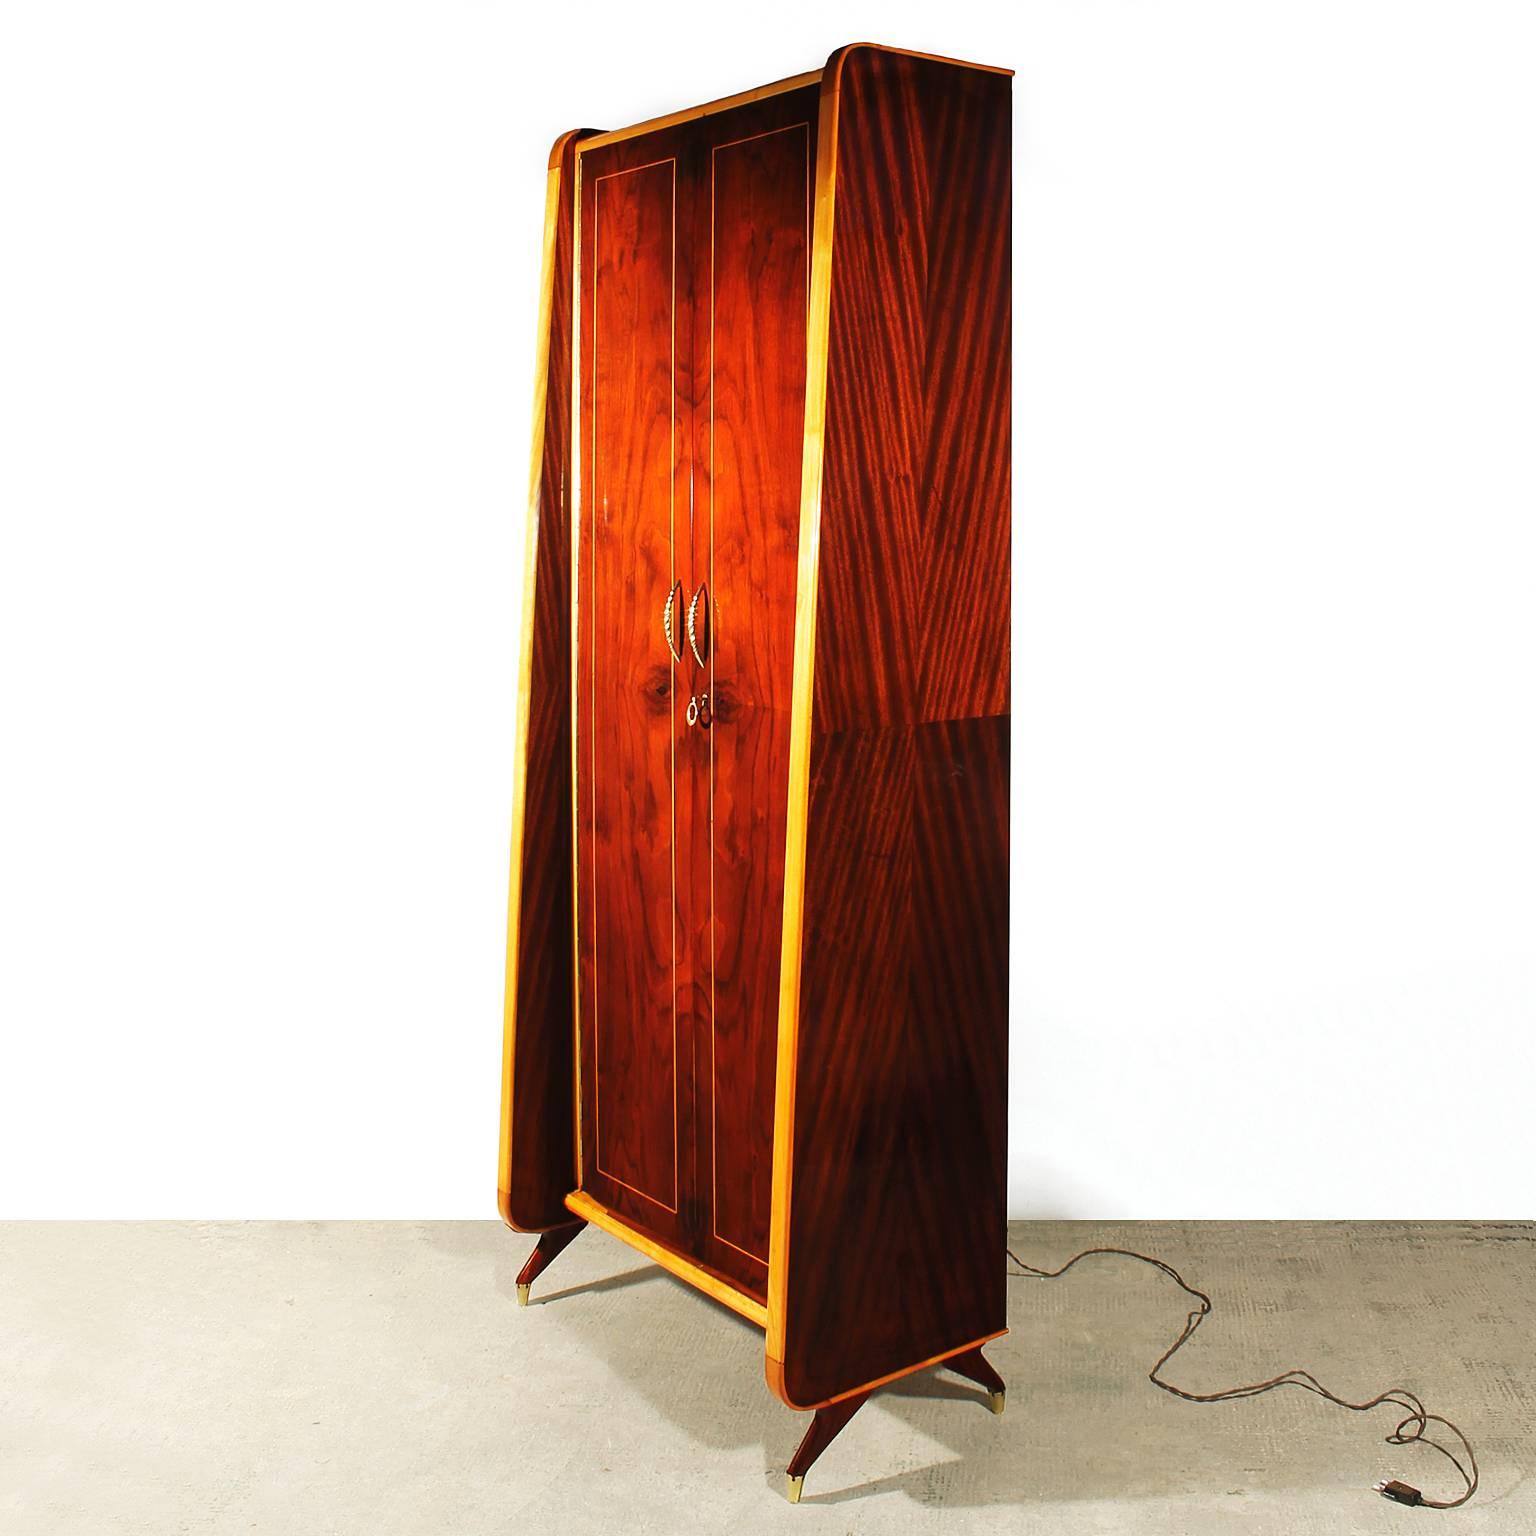 Charming entrance hall wardrobe, mahogany and rosewood veneers, maple jambs and filets, mahogany veneer inside, French polish, brass and multicolored plastic, light inside, polished brass handles, key and feet,
Italy, circa 1950.